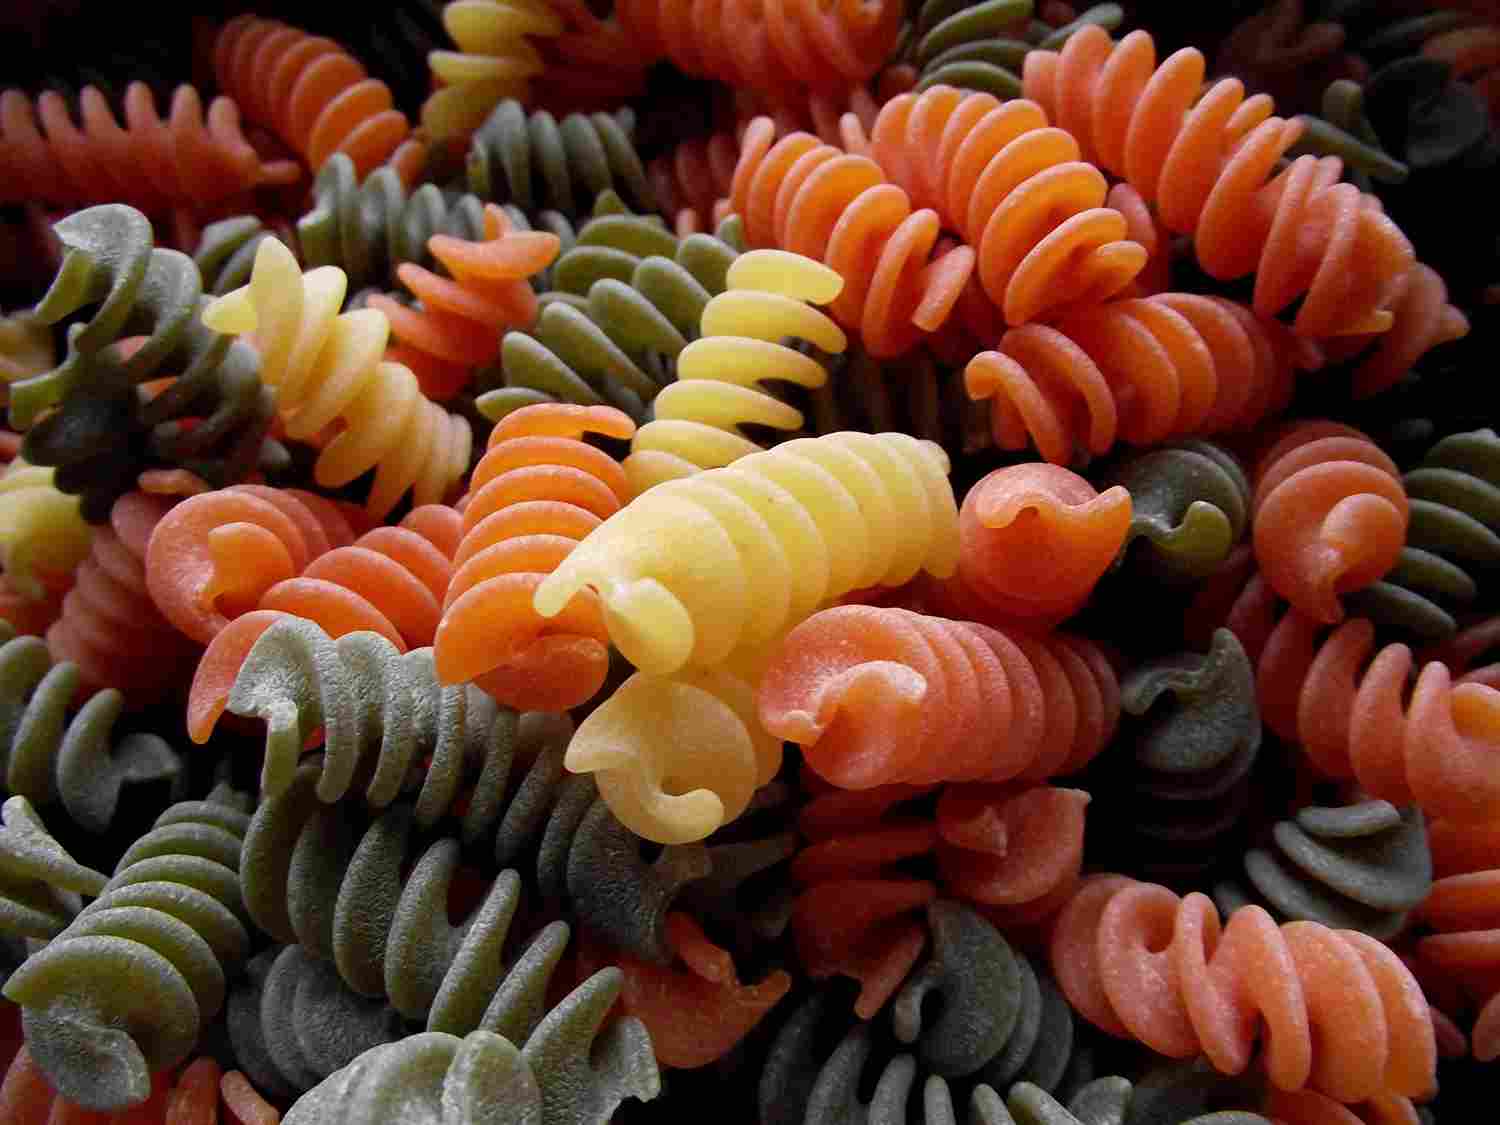 The purchase price of fusilli pasta + advantages and disadvantages